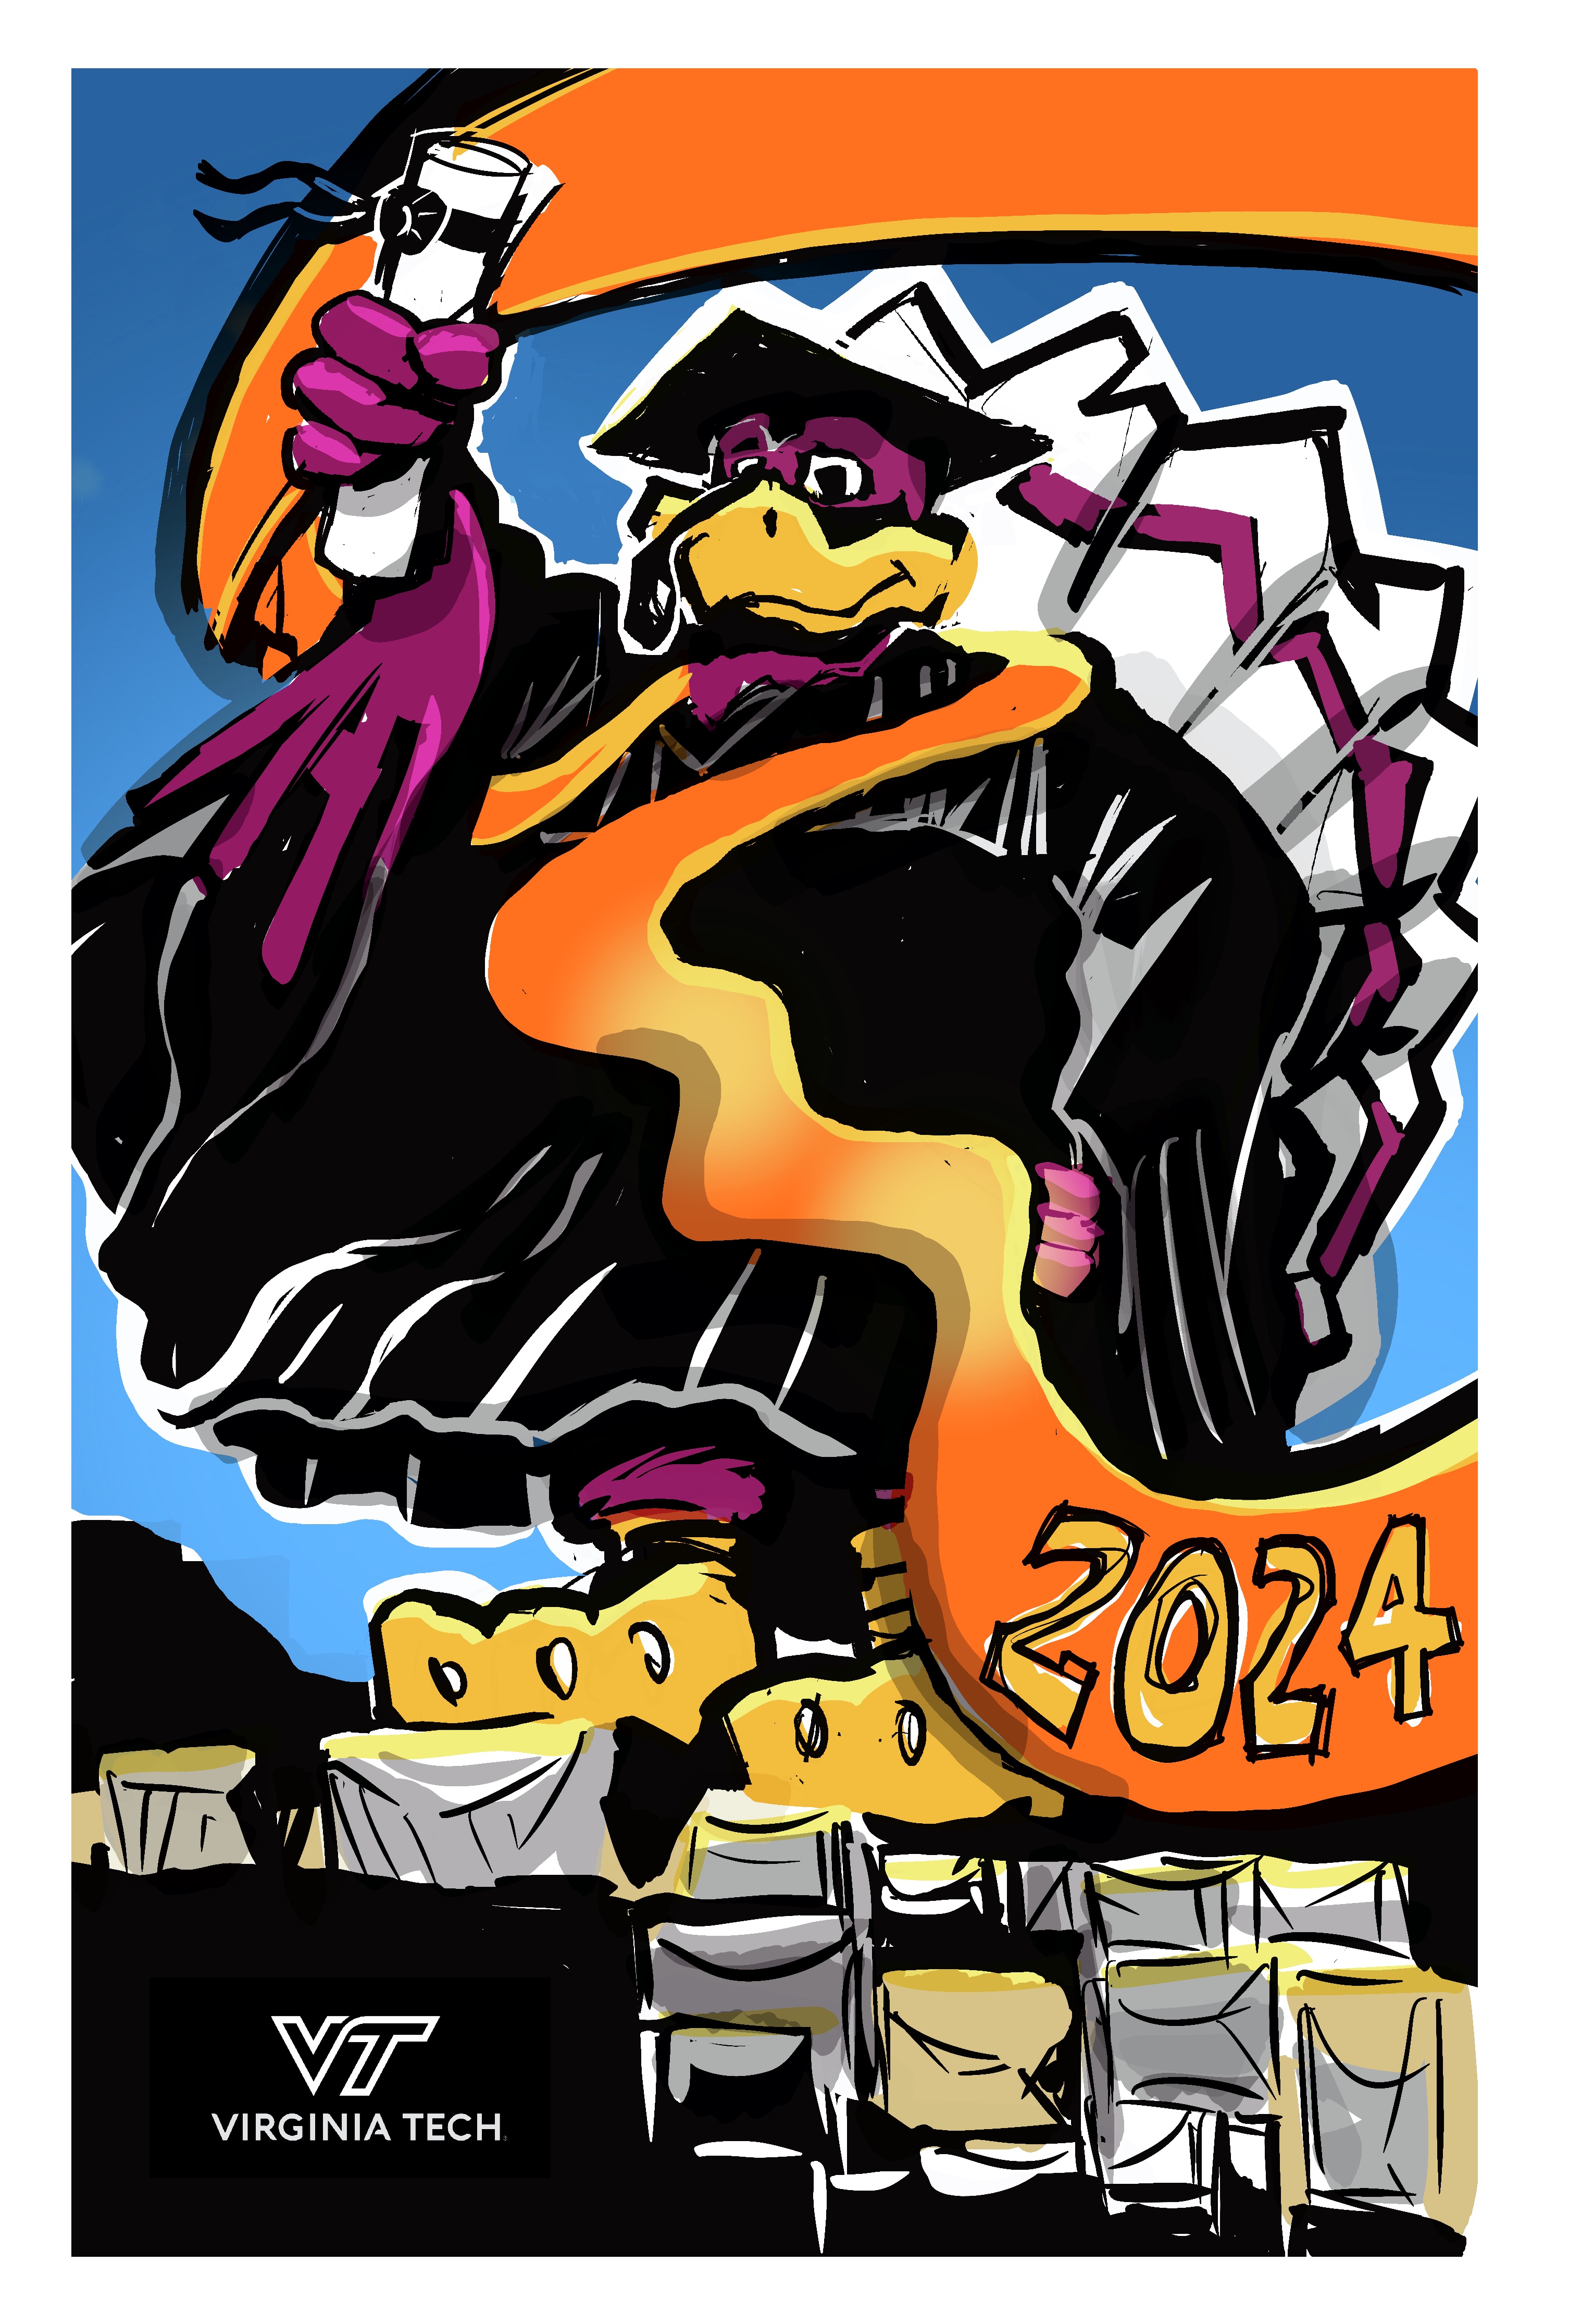 Digital sketch of the HokieBird lifting a diploma and in Commencement Cap & Gown